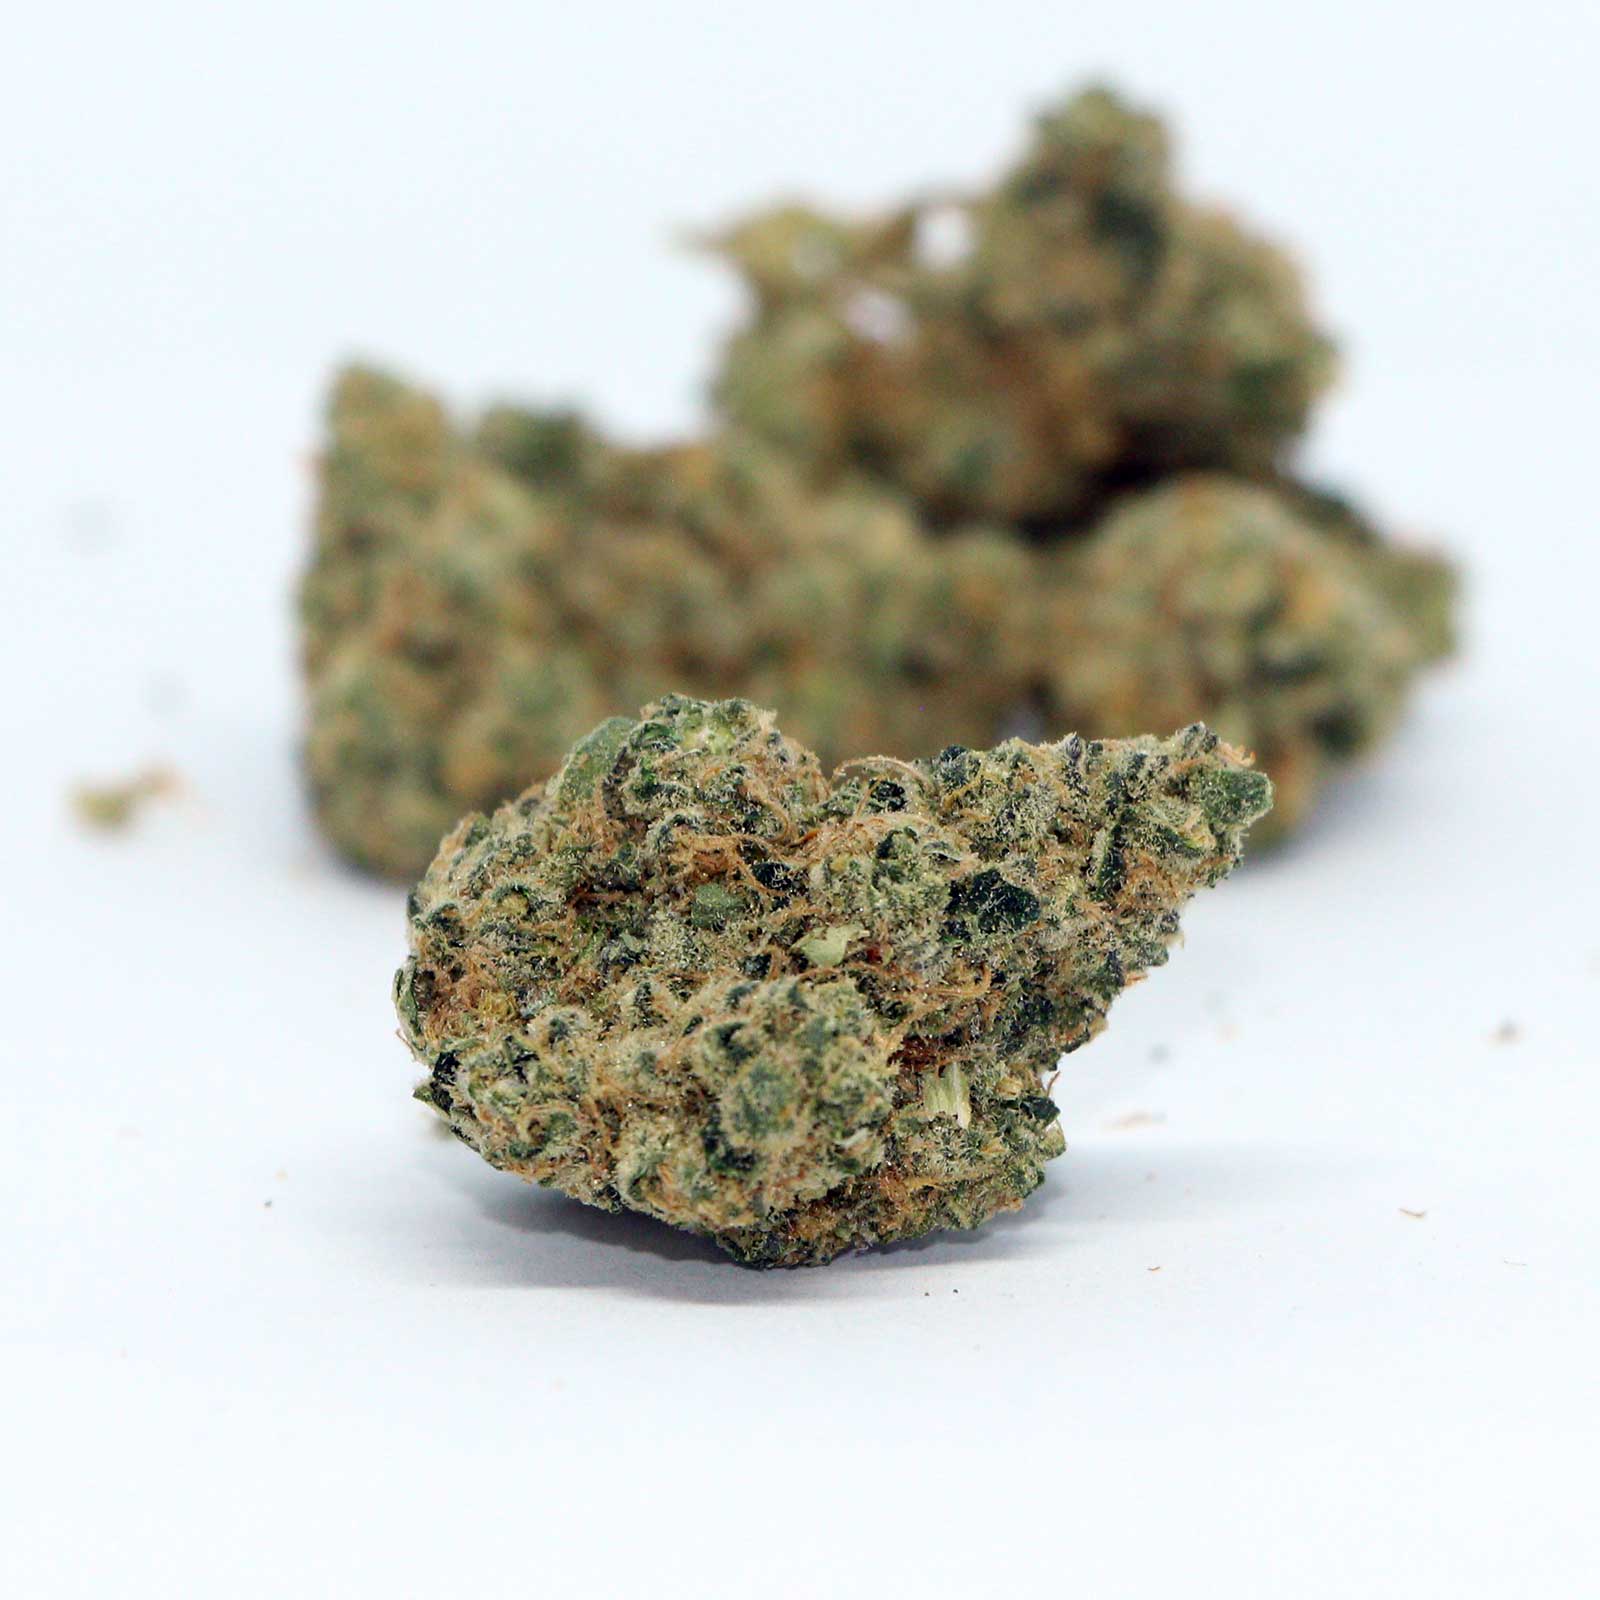 Strain Review: Mitten Cake Batter by Jungle Boys - The Highest Critic